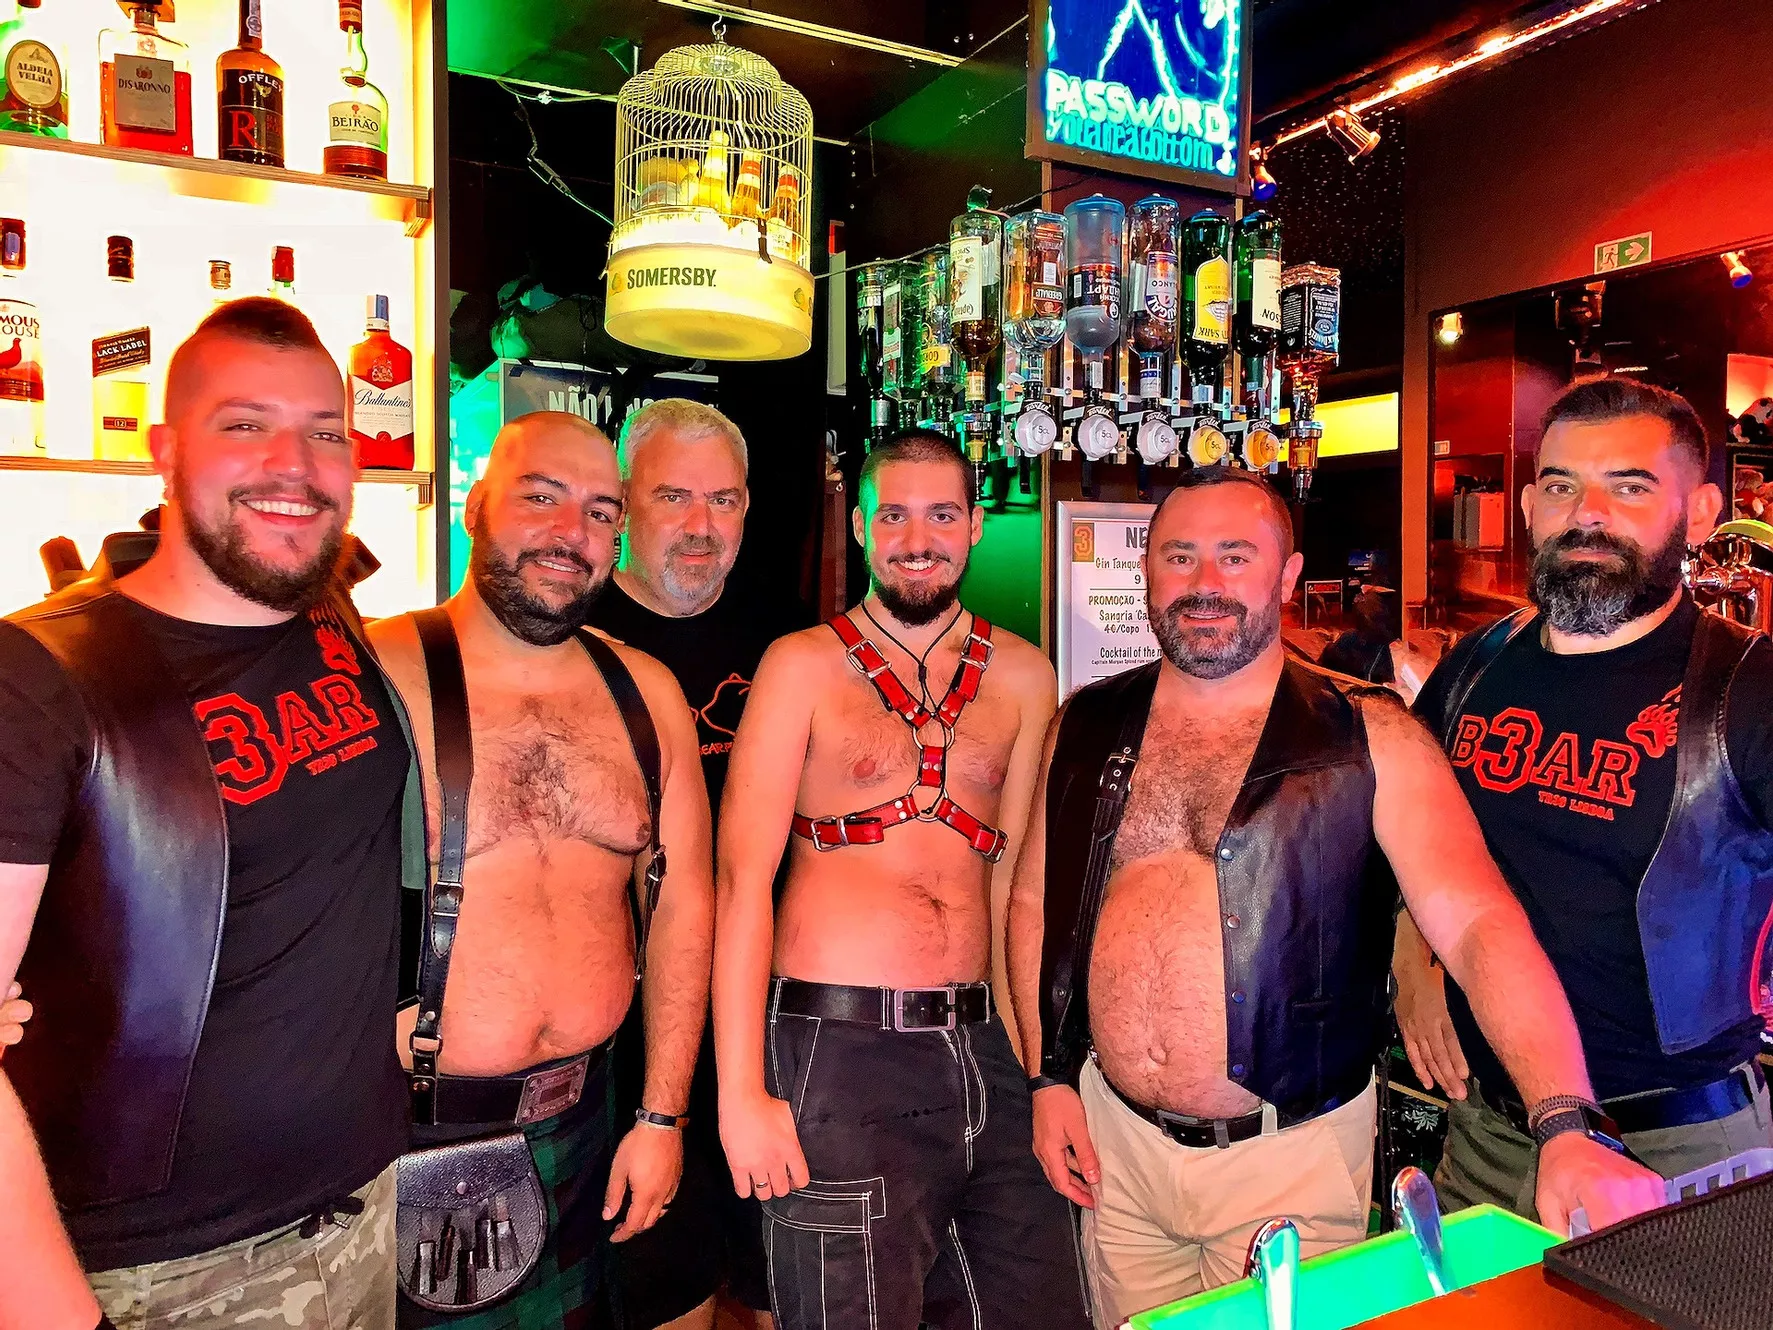 TR3S in Portugal, Europe | LGBT-Friendly Places,Bars - Rated 3.9